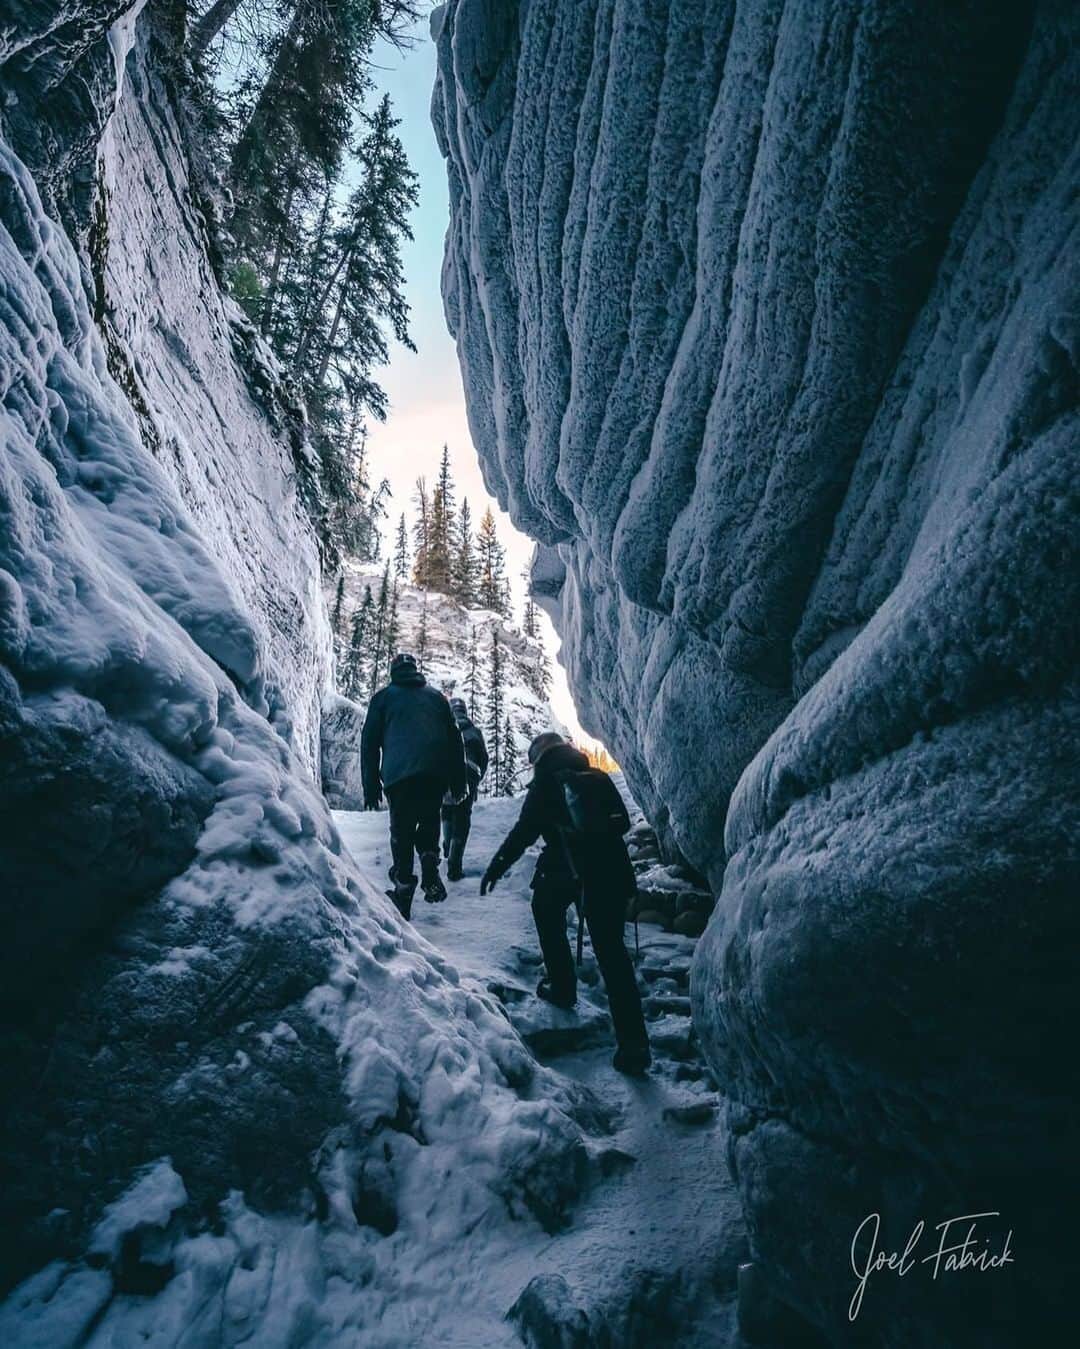 Ricoh Imagingさんのインスタグラム写真 - (Ricoh ImagingInstagram)「Posted @withregram • @joelfabrick Climbing out of the Cavern.  The Maligne Canyon ice walk tour was such an amazing experience. Its hard to capture the massive scale of this canyon while you are walking along the frozen river at its base. Hard to believe that we would have been well under the surface of the water once the ice thaws and water begins rushing through this canyon throughout the spring/summer.⠀⠀⠀⠀⠀⠀⠀⠀⠀ ⠀⠀⠀⠀⠀⠀⠀⠀⠀ This is known as a slot canyon created by erosion, and can measure up to 50 Meters deep in places.  Would love to come see it again in the summer when the waterfalls and river have thawed and are rushing through the caverns.⠀⠀⠀⠀⠀⠀⠀⠀⠀ .⠀⠀⠀⠀⠀⠀⠀⠀⠀ .⠀⠀⠀⠀⠀⠀⠀⠀⠀ .⠀⠀⠀⠀⠀⠀⠀⠀⠀⠀⠀⠀⠀⠀⠀⠀ #canada #rockymountains #hiking #forest #winter #canyon #erosion #frozen #breathtaking #colorful #moody #nature #naturephotography #explore #wander #getoutdoors #alberta #explorecanada #welivetoexplore #explorealberta #jaspernationalpark #wanderlust #peaceful #mountains #frozenwaterfall #iceclimbing #maligne #pentaxk1 #teamRicohImaging #teamPentax」3月7日 6時00分 - ricohpentax